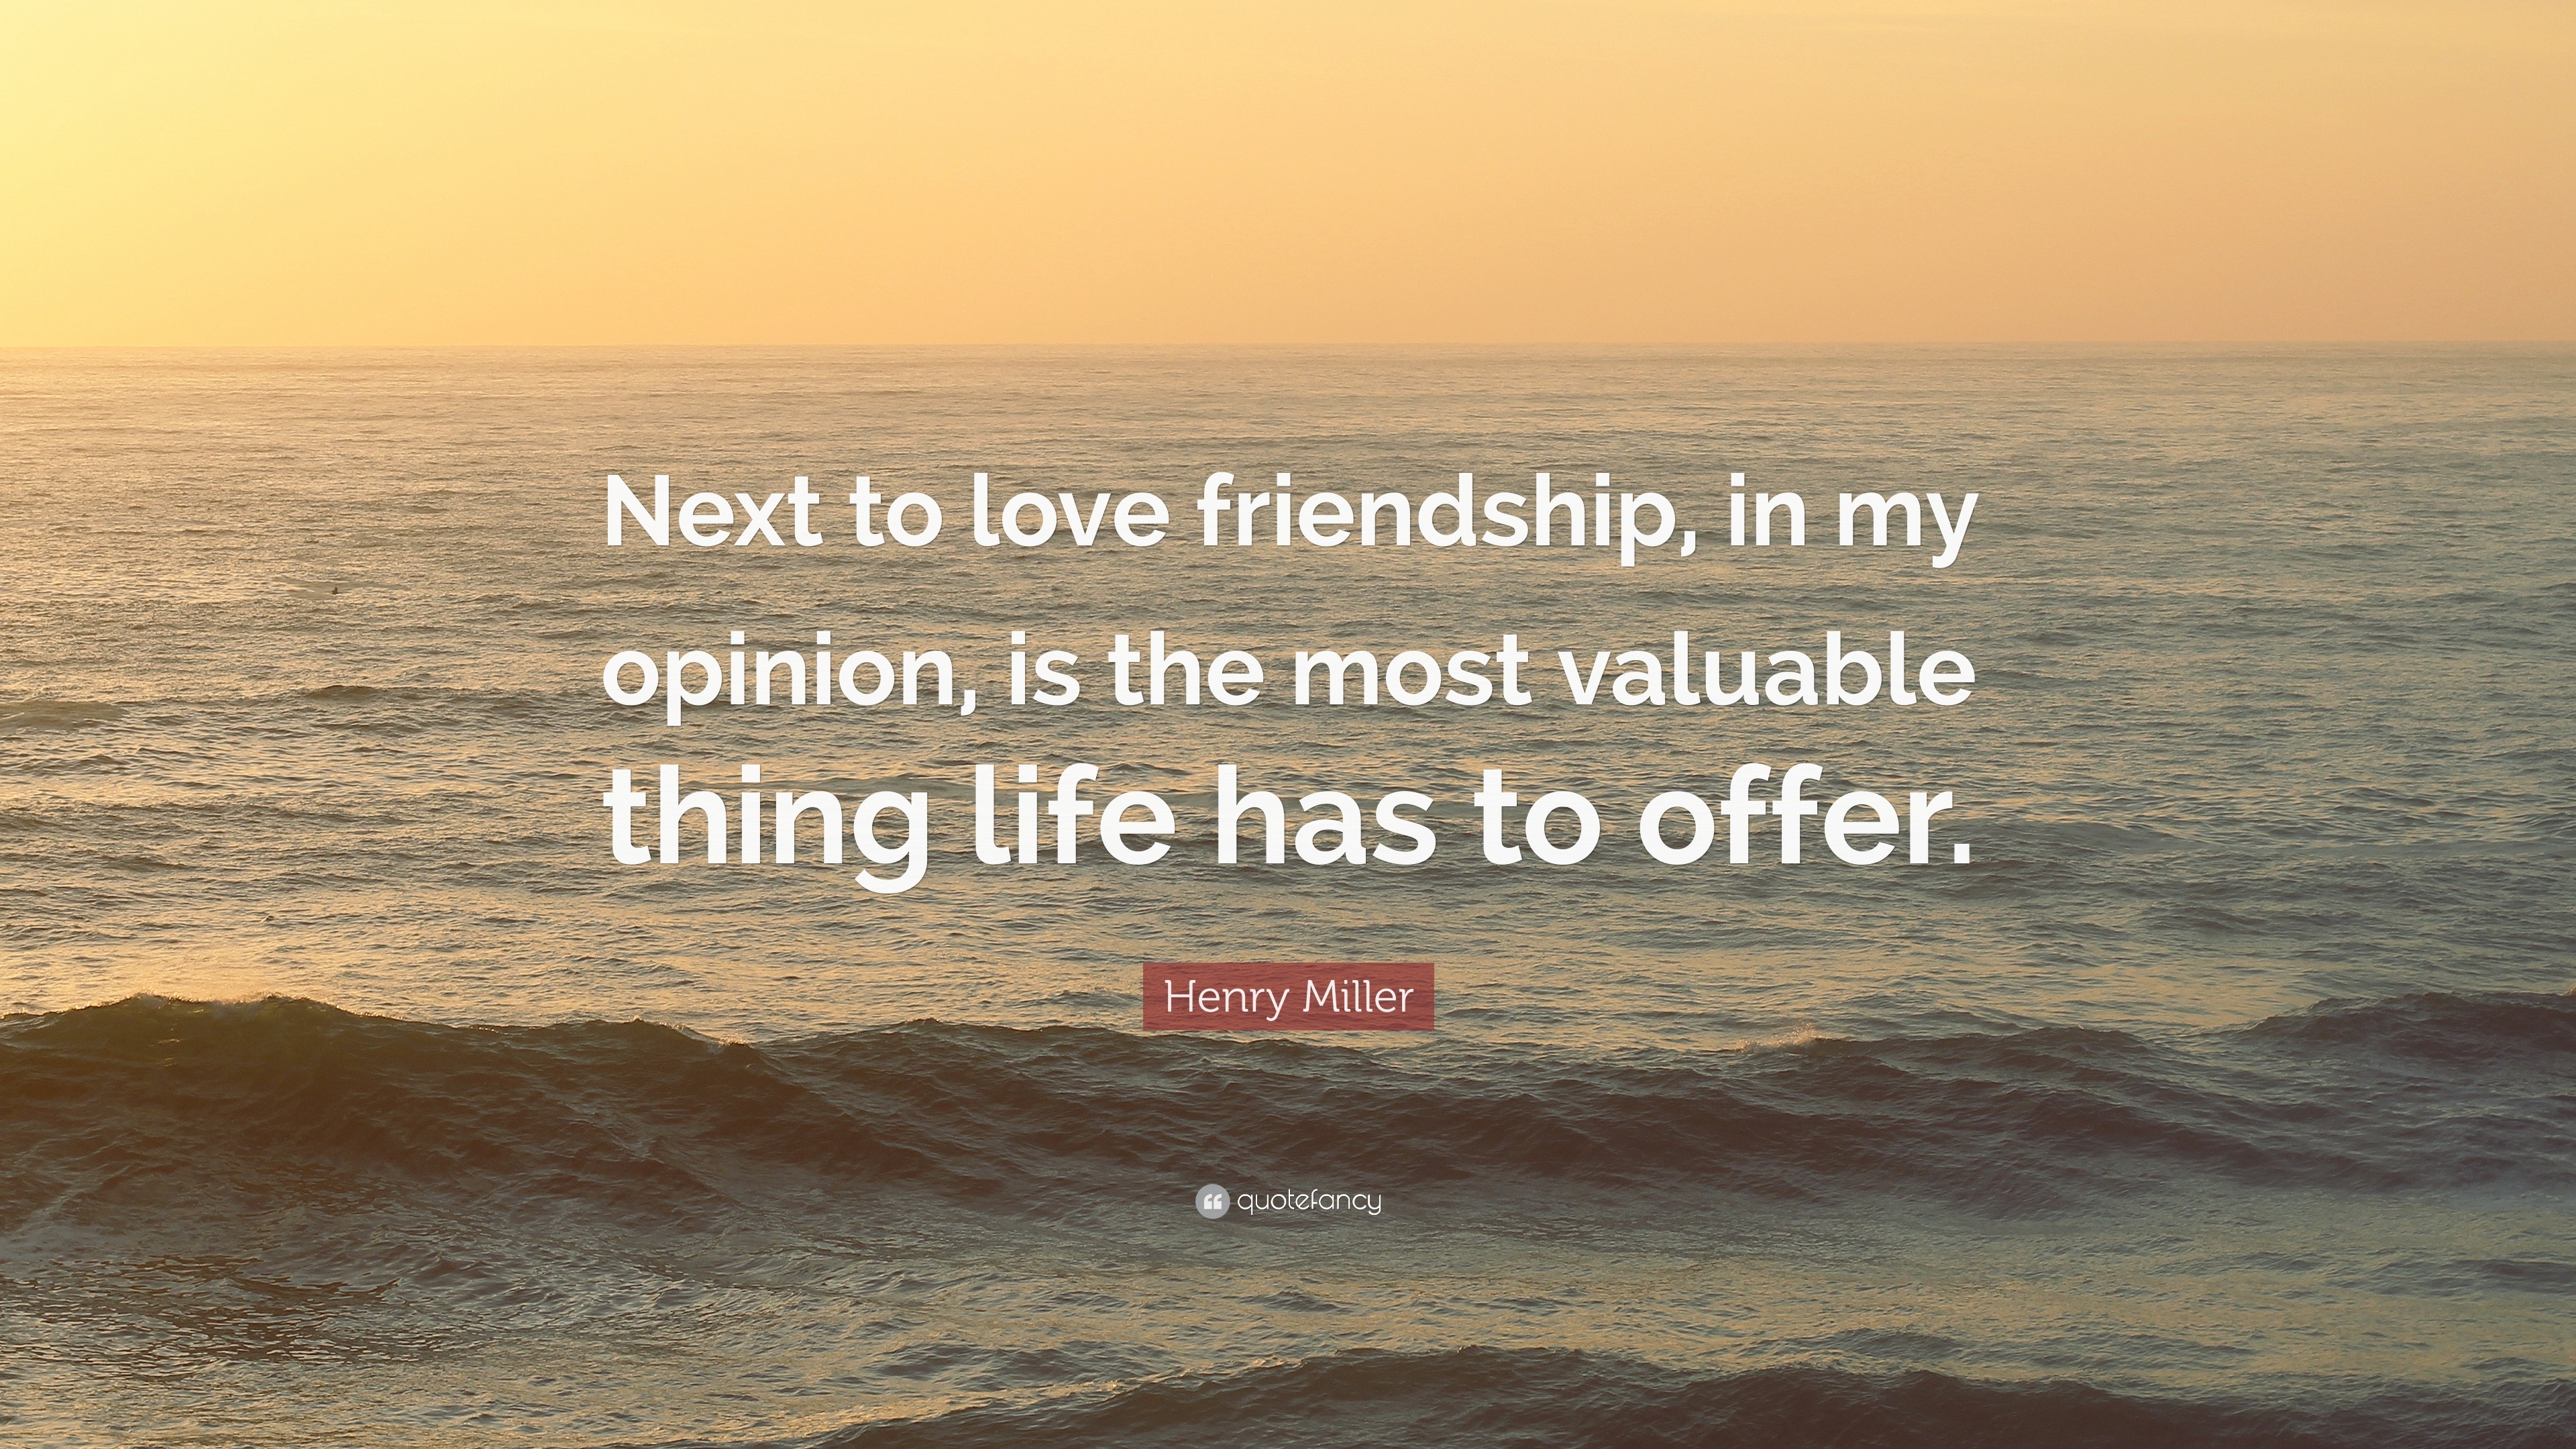 Henry Miller Quote “Next to love friendship in my opinion is the